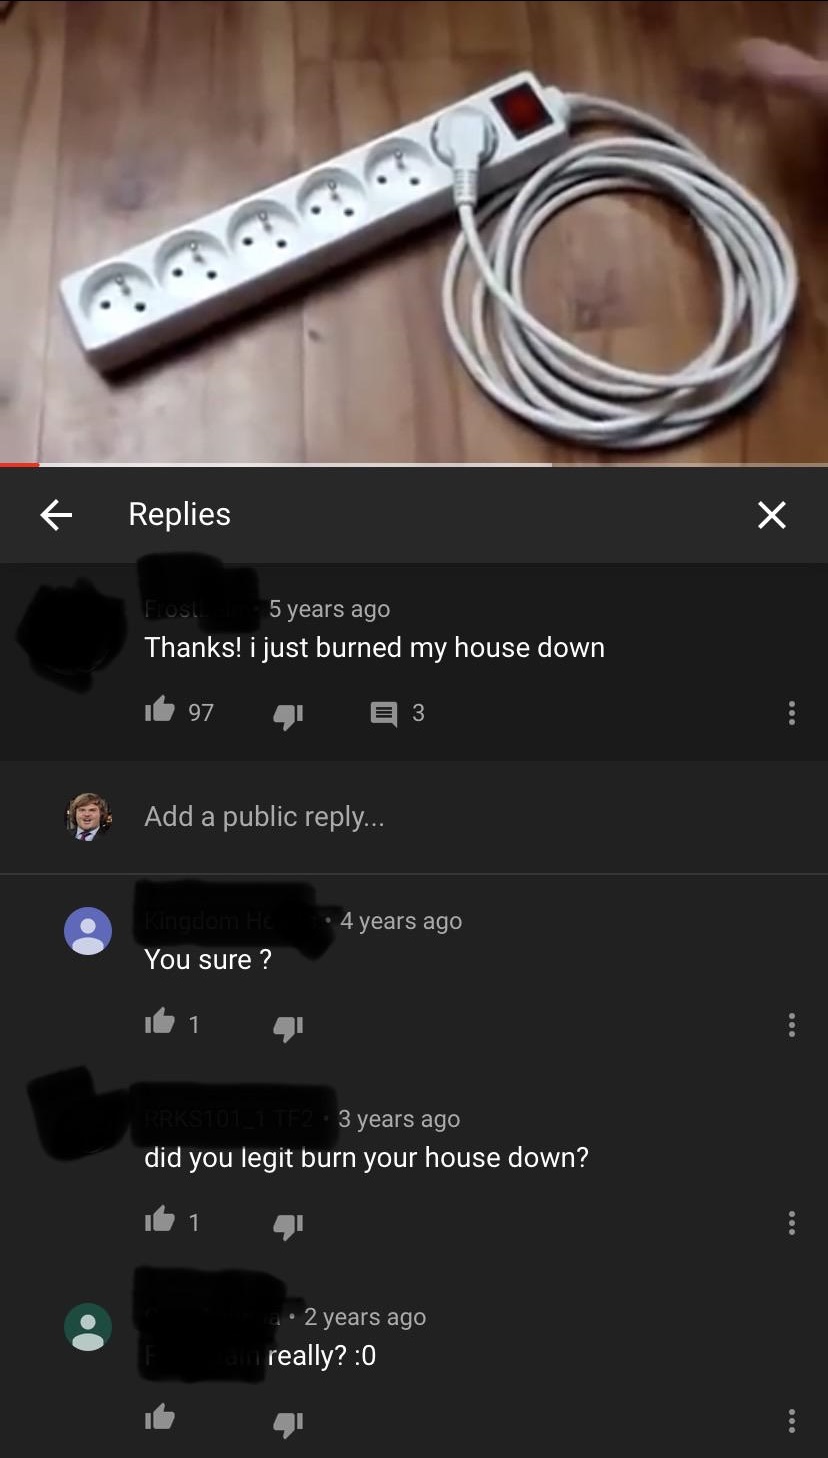 6 Replies 5 years ago Thanks! i just burned my house down . 97 E 3 Add a public ... 4 years ago You sure? 3 years ago did you legit burn your house down? 1 2 years ago really?0